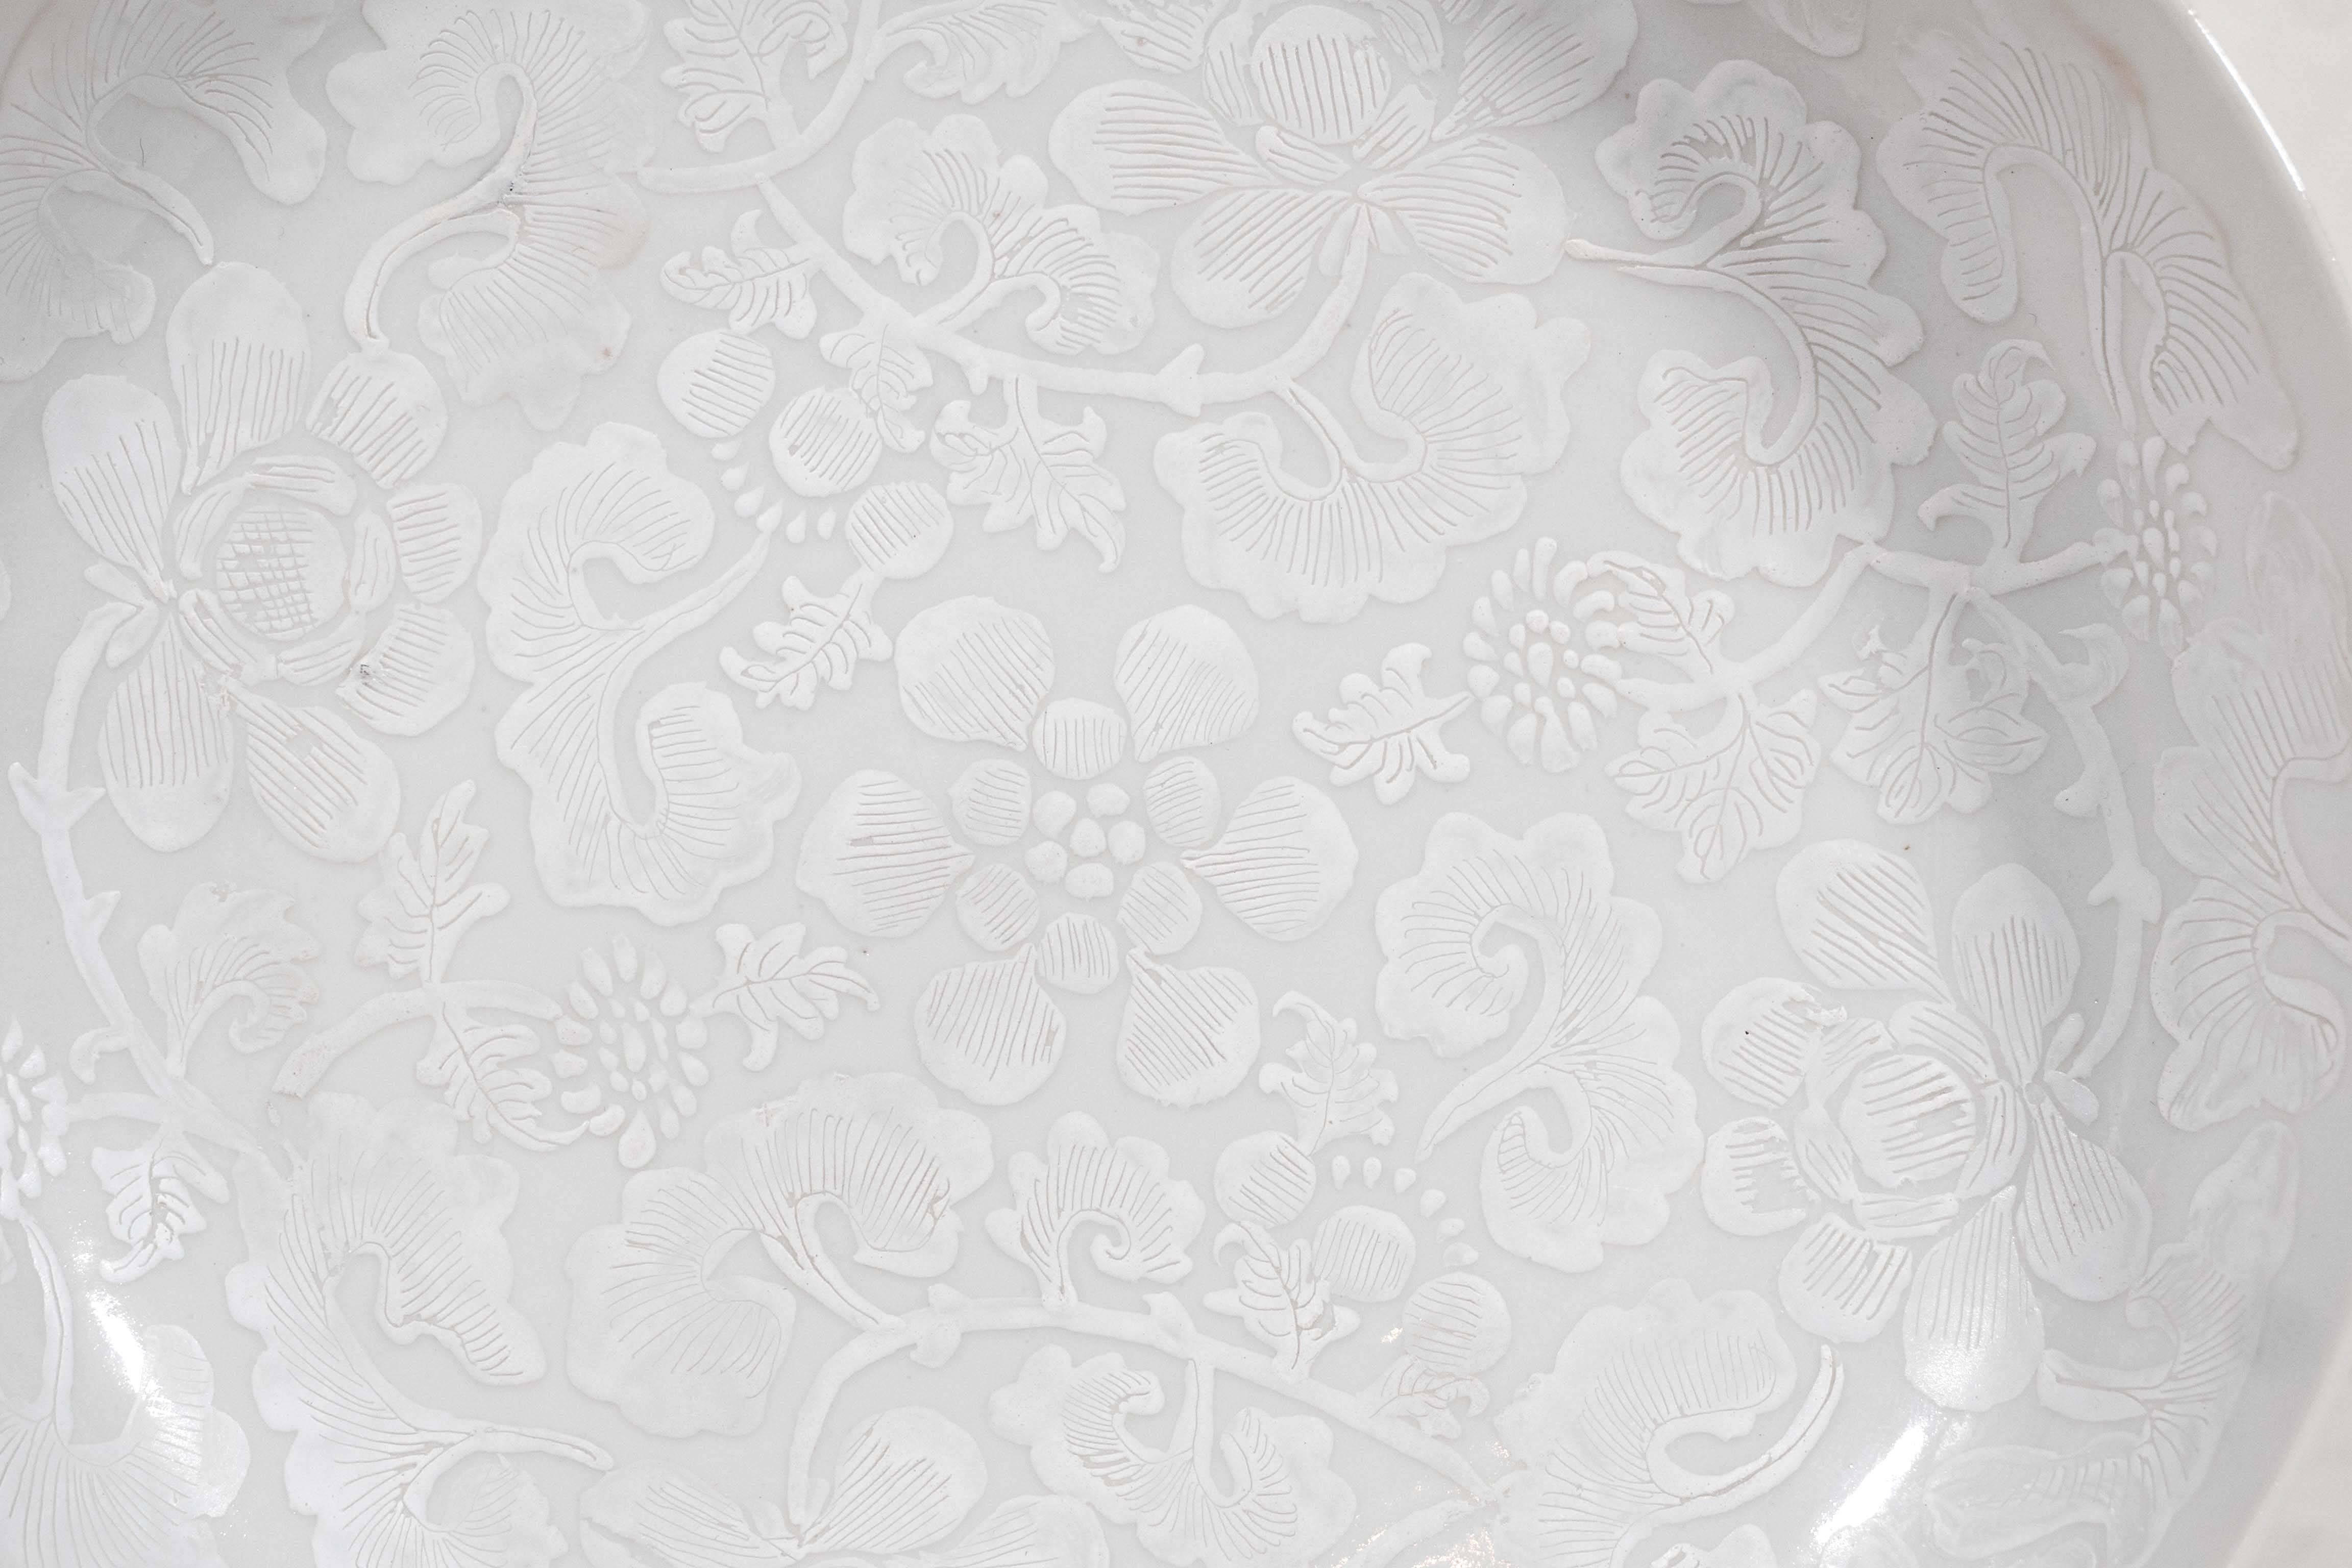 An exceptional Chinese porcelain dish painted with white on white (Bianco Sopra Bianco). The white enamels on the white porcelain creates the effect of lace laid down on the porcelain. Made during the Qianlong period, circa 1750. The design shows